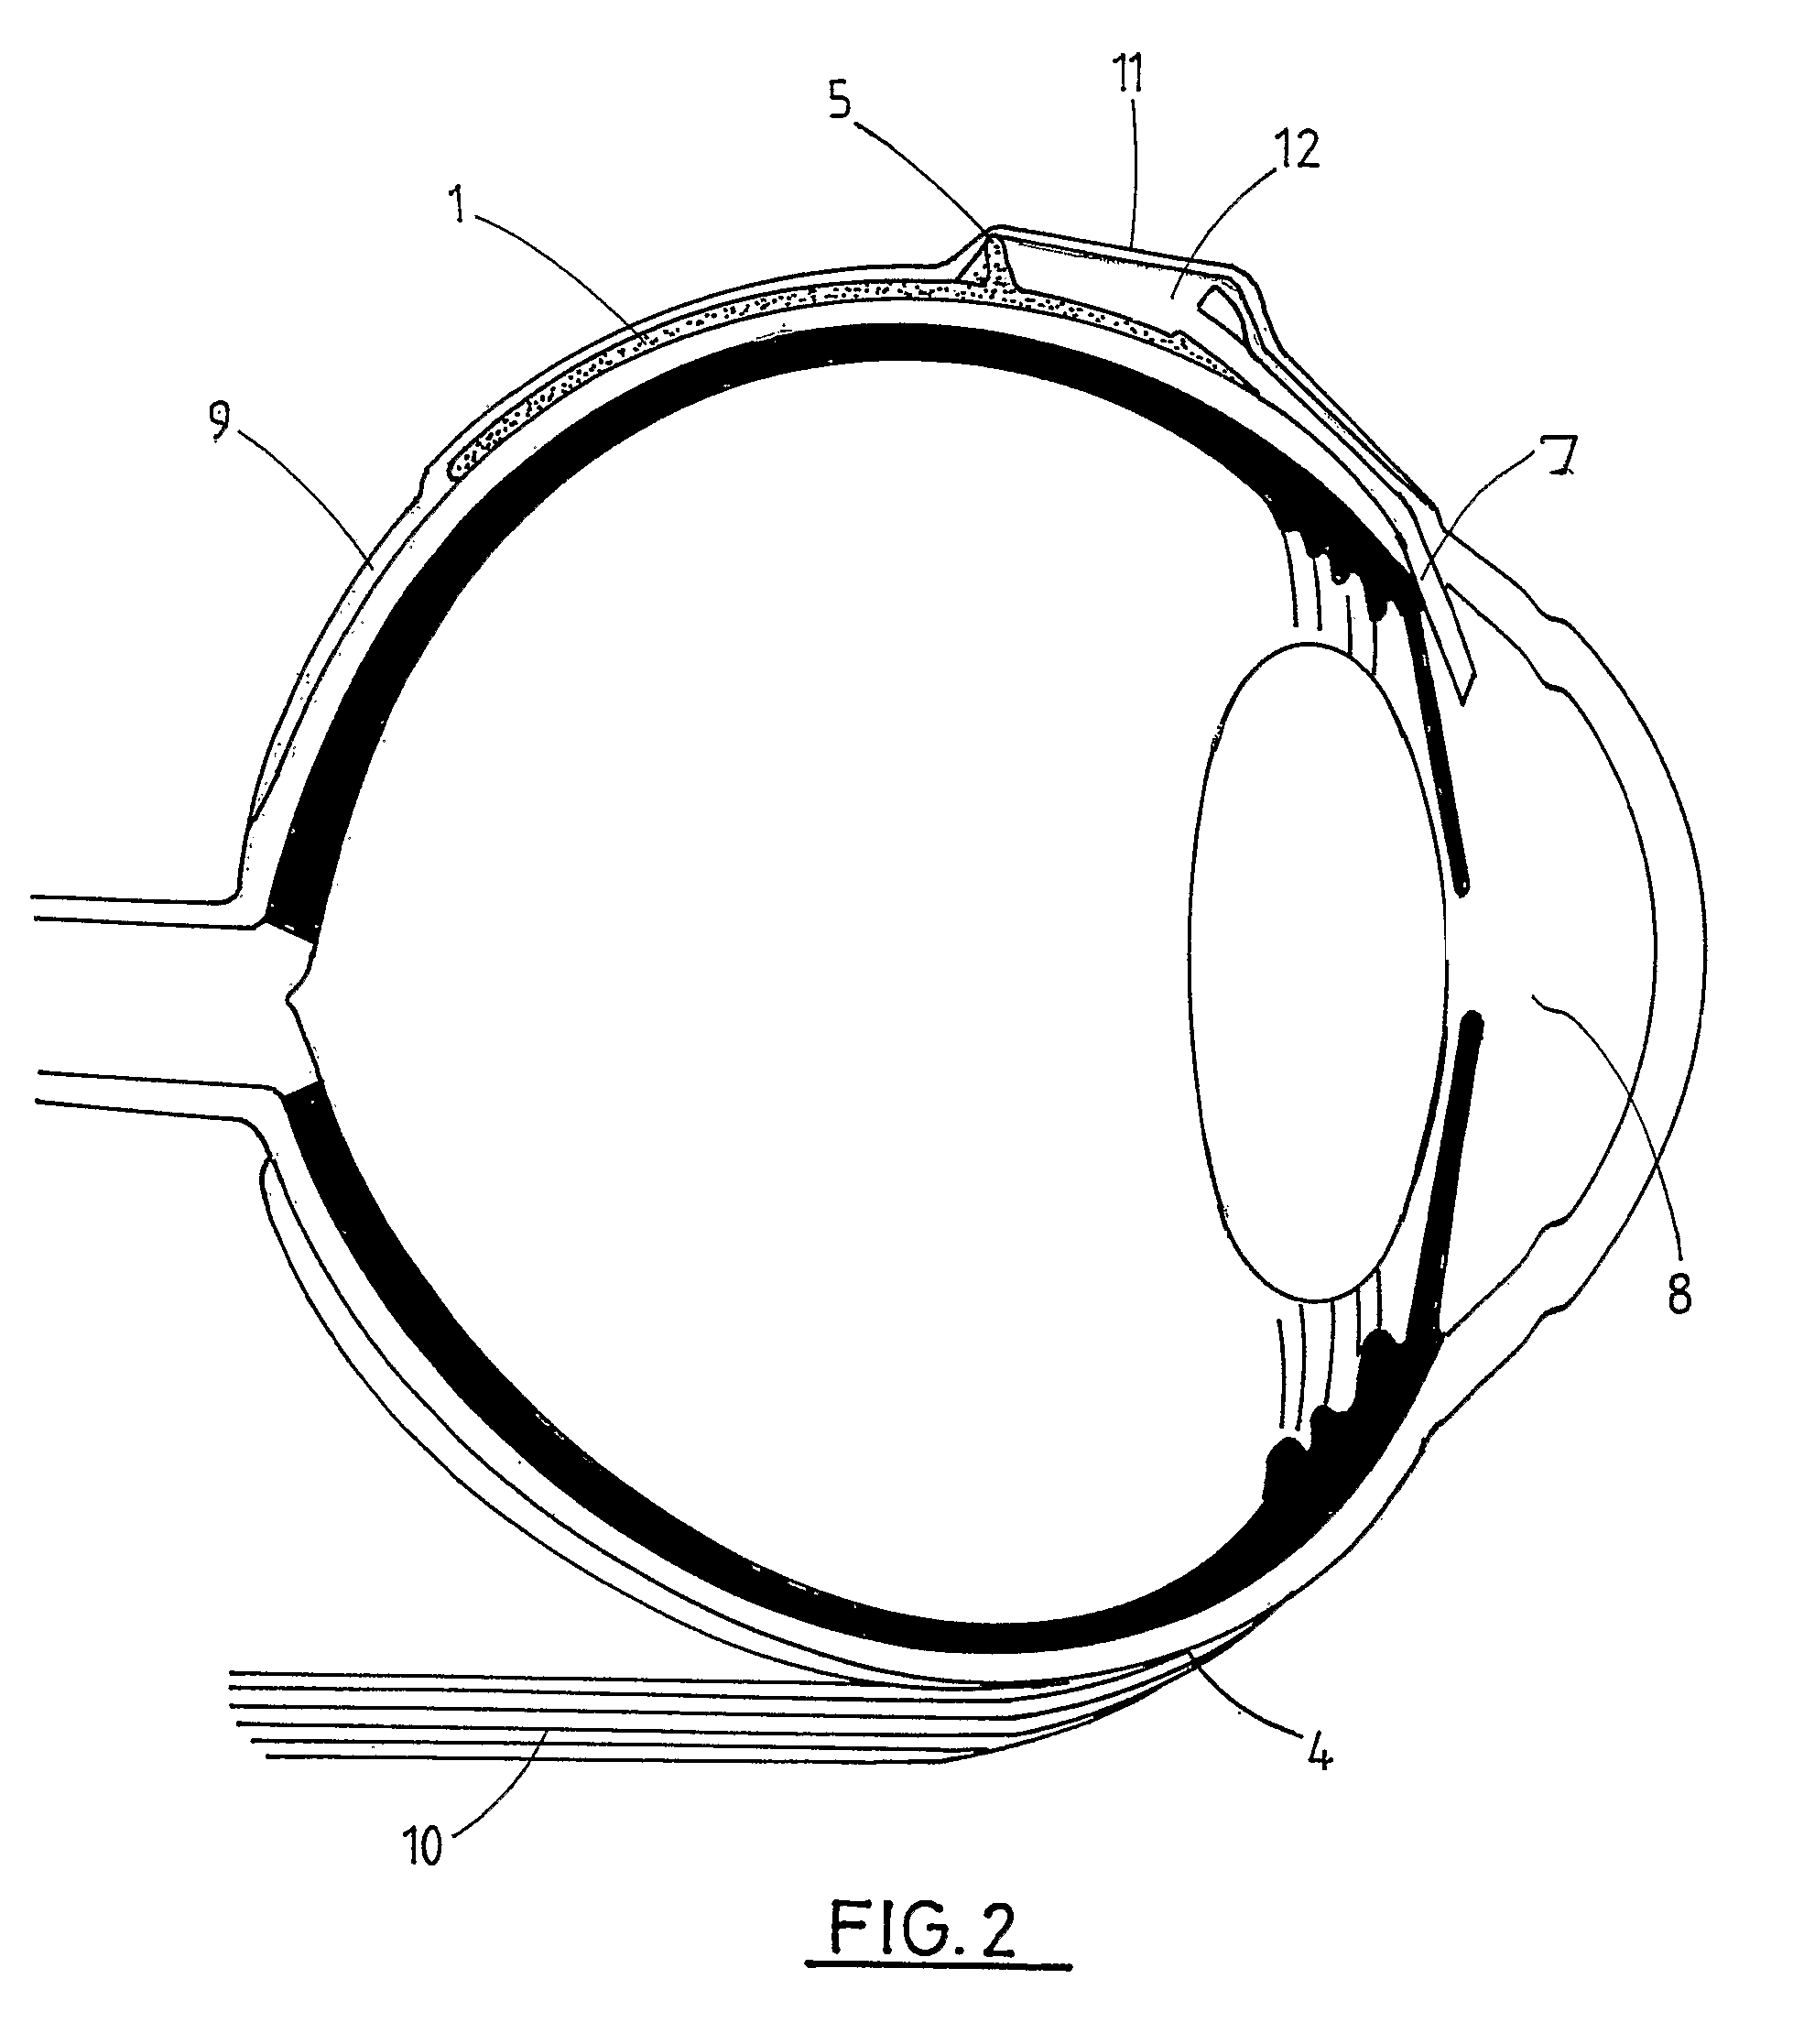 Ophthalmic implant for treating glaucoma